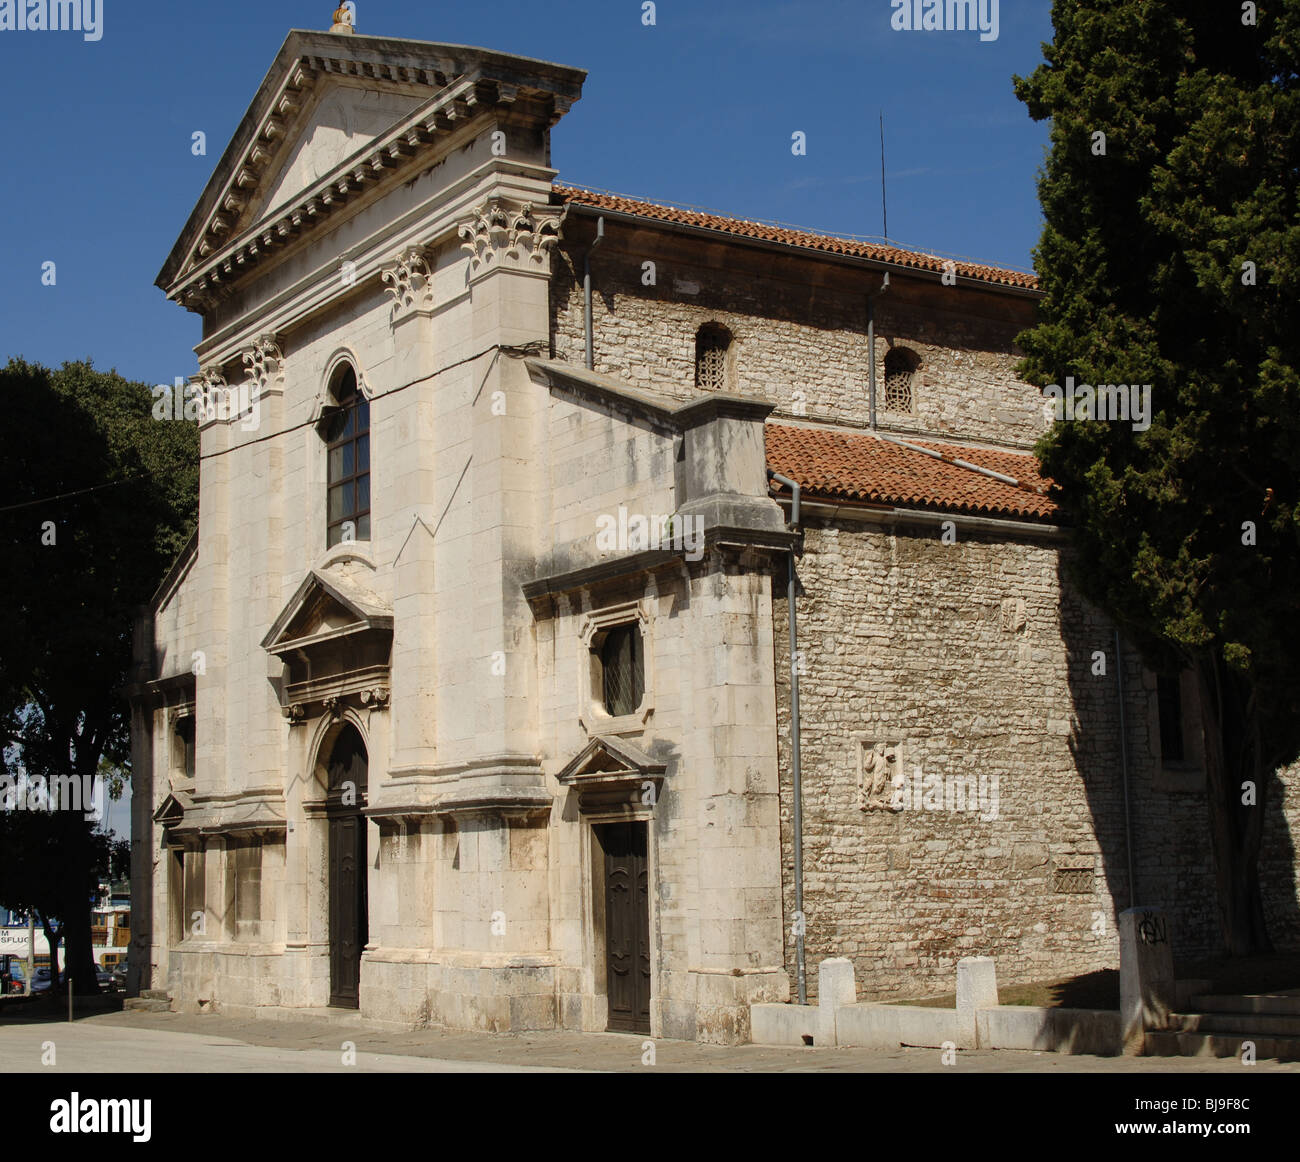 Pula. Cathedral of the Assumption of the Virgin Mary. Outside view. Republic of Croatia. Stock Photo